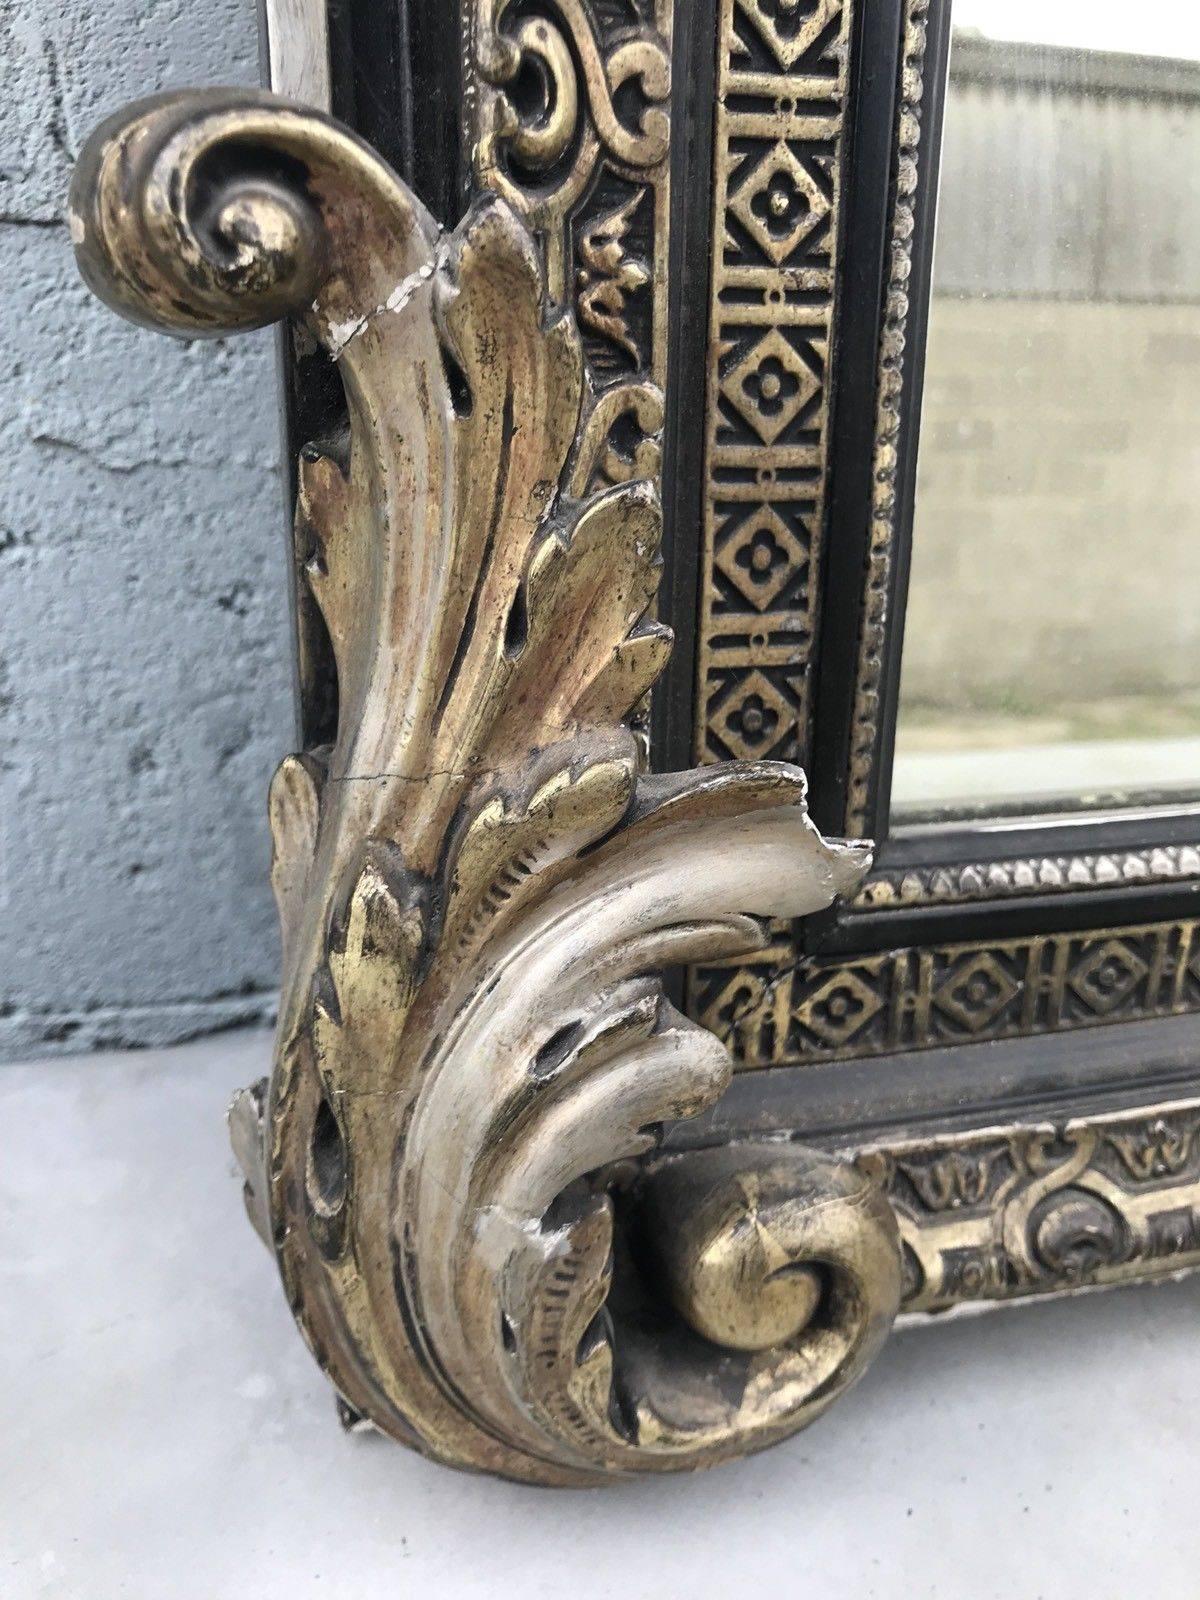  This is a stunning, and beautifully carved french mirror. In fantastic condition for its age. Very very hard to find anywhere!! The cherub is stunning.


Dimensions- 160cm tall, 90cm wide

 

Recently purchased on a trip to Paris this week!! Came